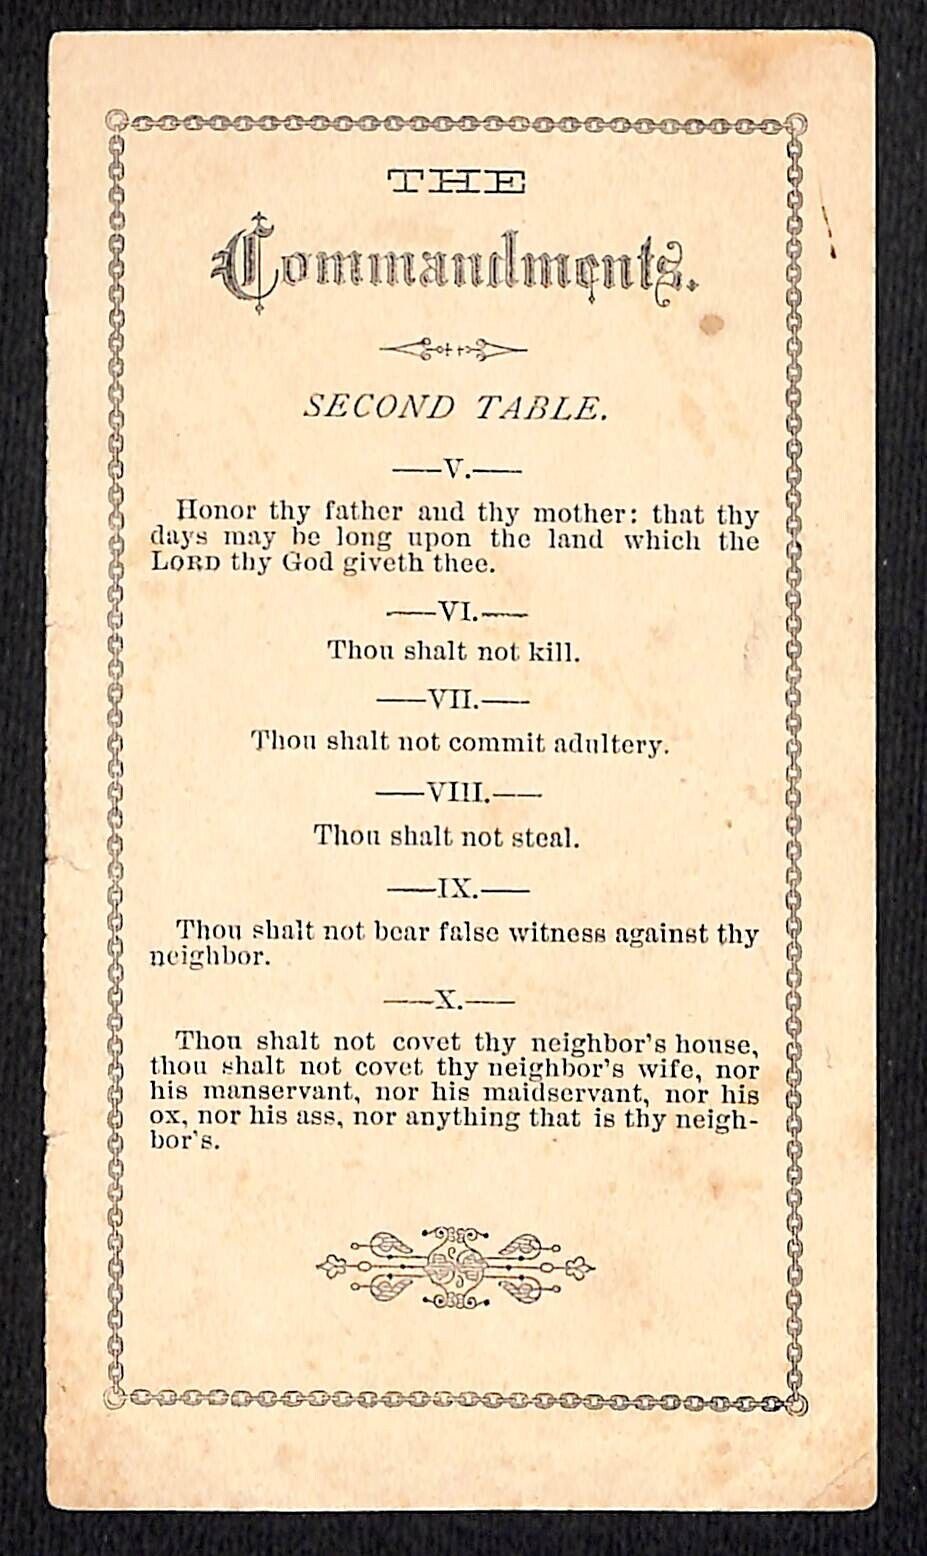 The Commandments c1880\'s-1900 on 2 Small Sheets